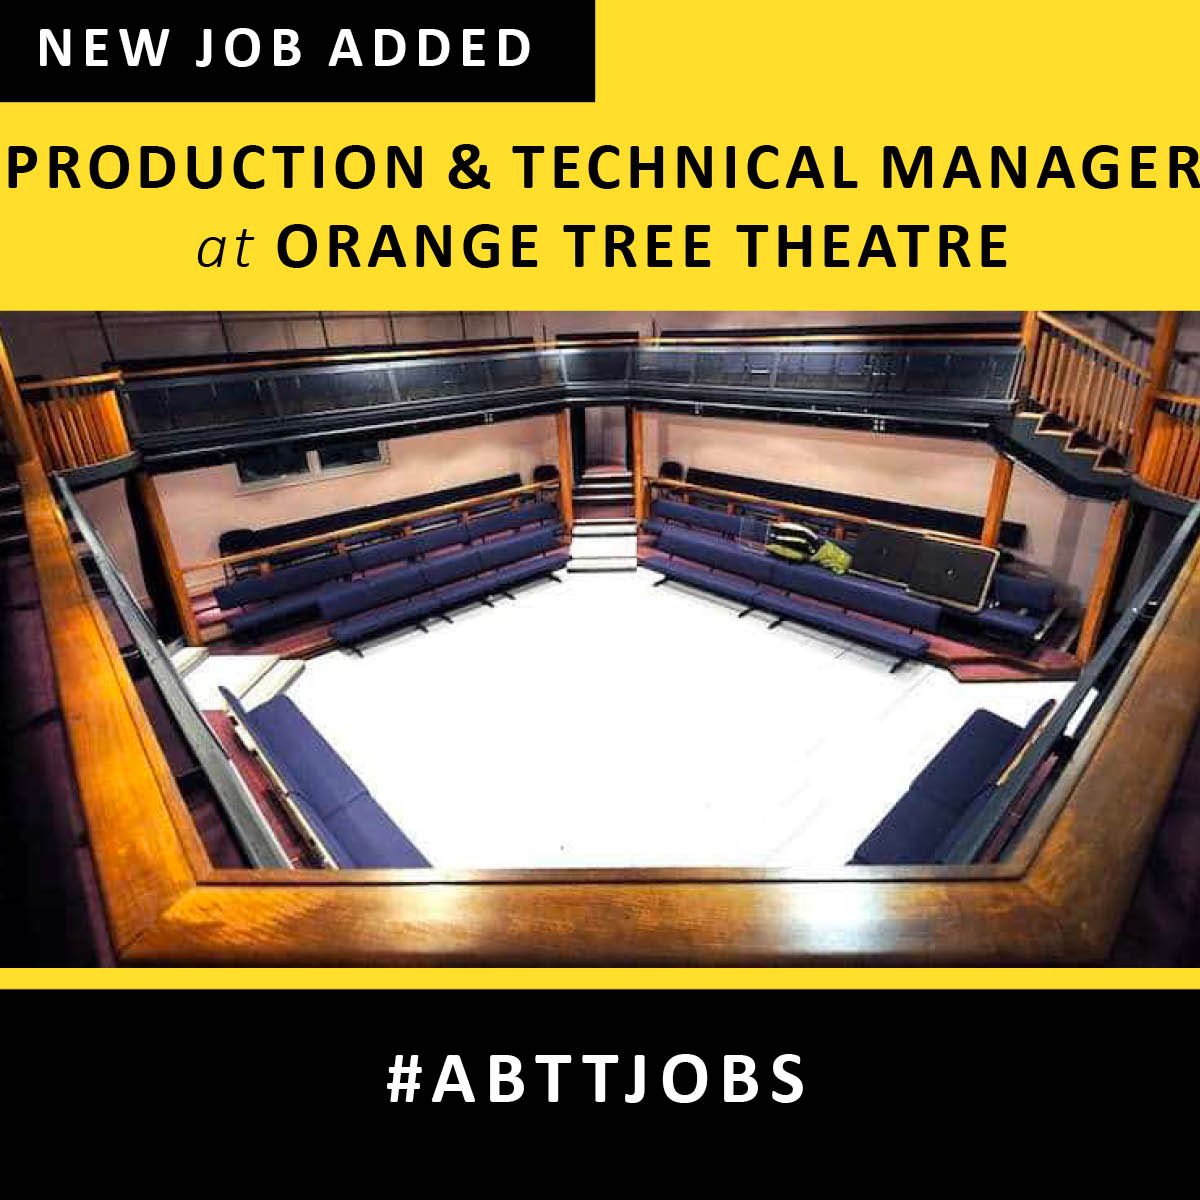 The Orange Tree Theatre are currently recruiting Production & Technical Manager to support their busy producing theatre with technical expertise and production management.

Find out more and apply here: abtt.org.uk/jobs/productio…

#ABTTjobs #TheatreJobs #BackstageJobs